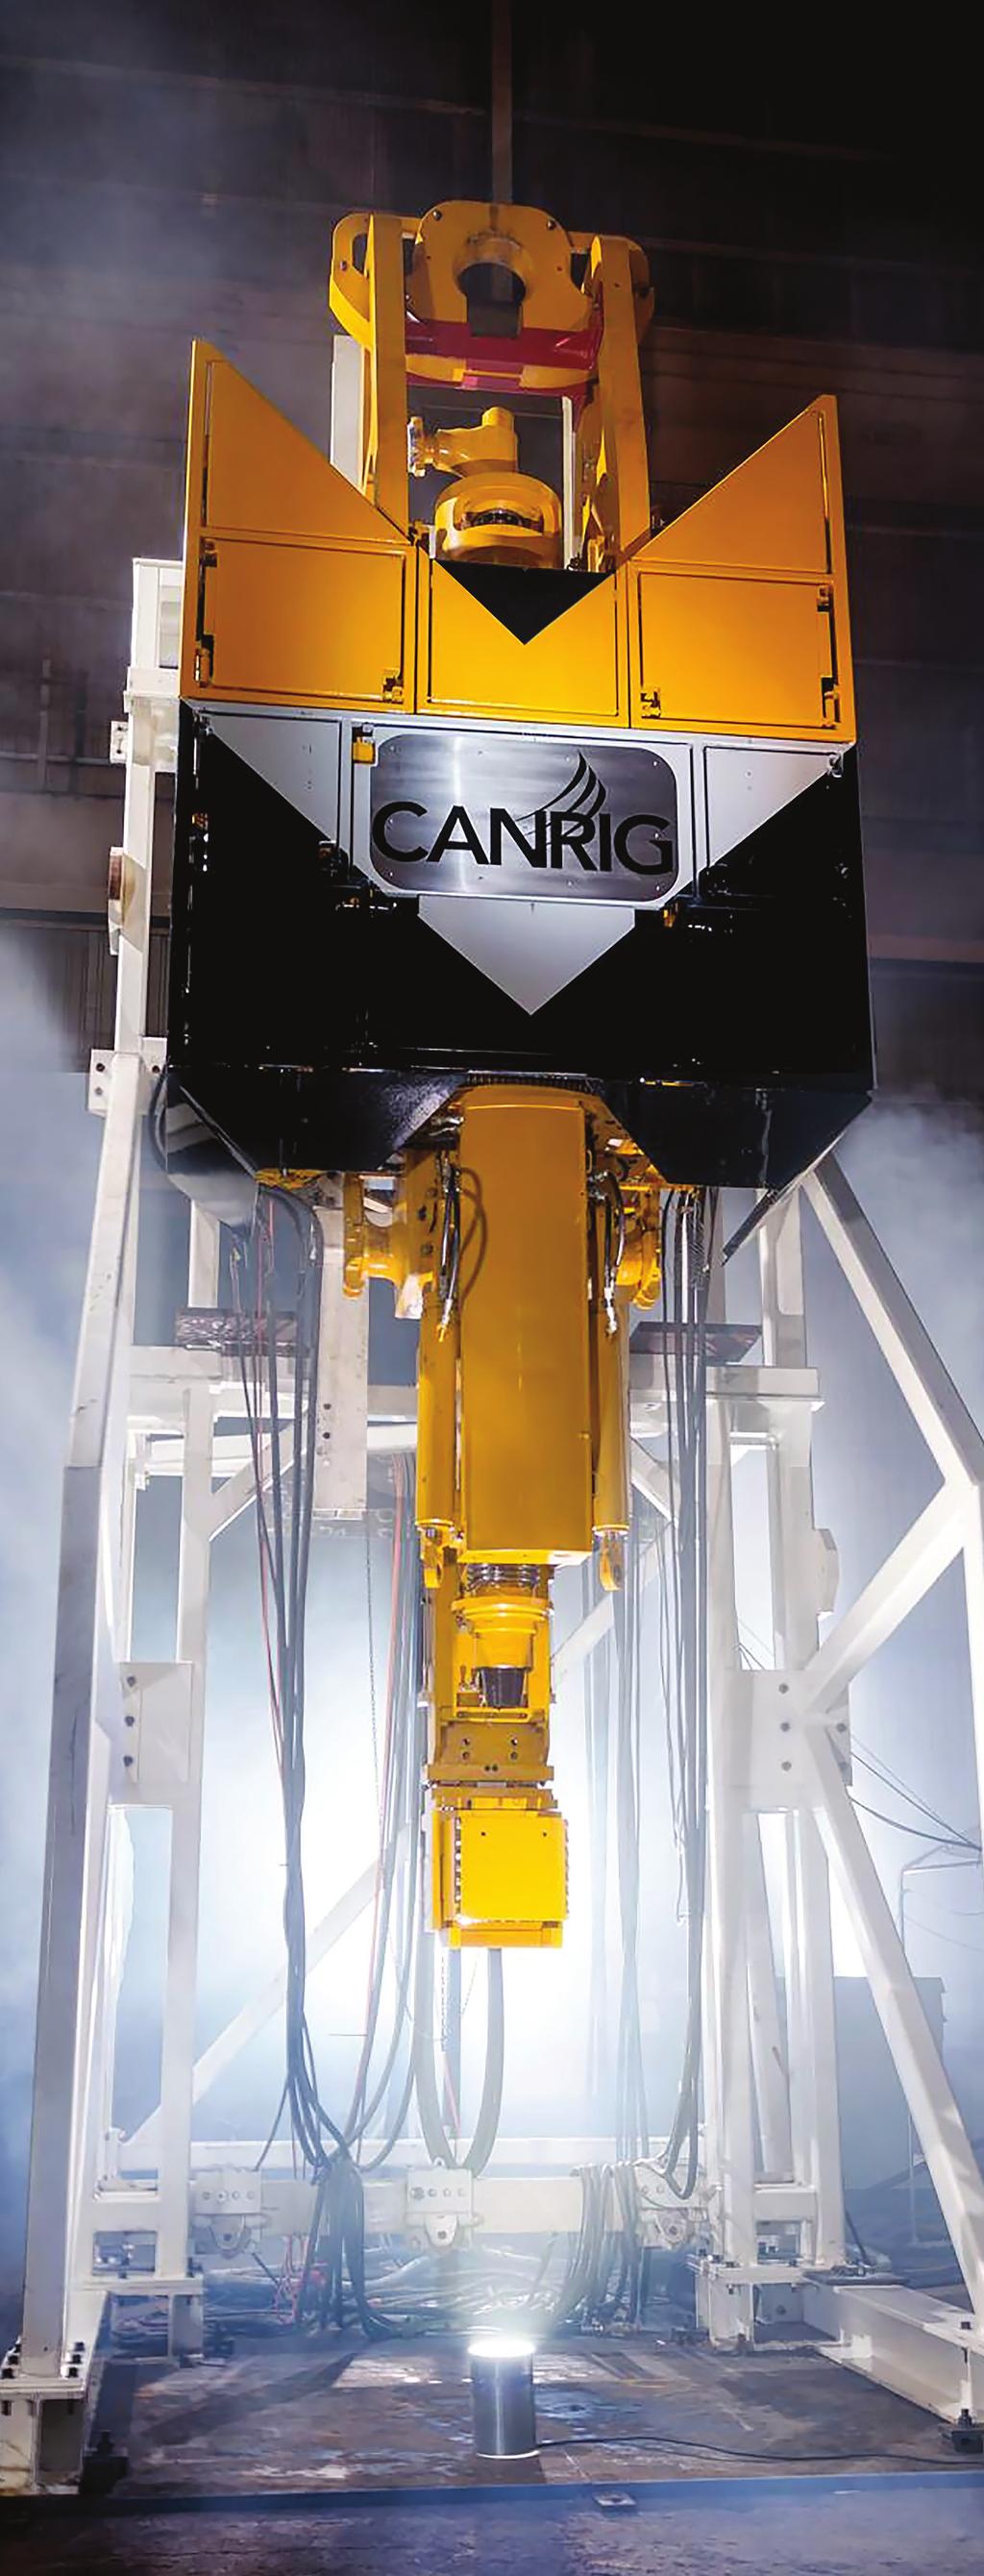 THE NEXT GENERATION OF TOP DRIVE SYSTEMS As one of the world s leading suppliers of top drive systems in the oil and gas industry, Canrig strives to set the standard for safety, reliability and